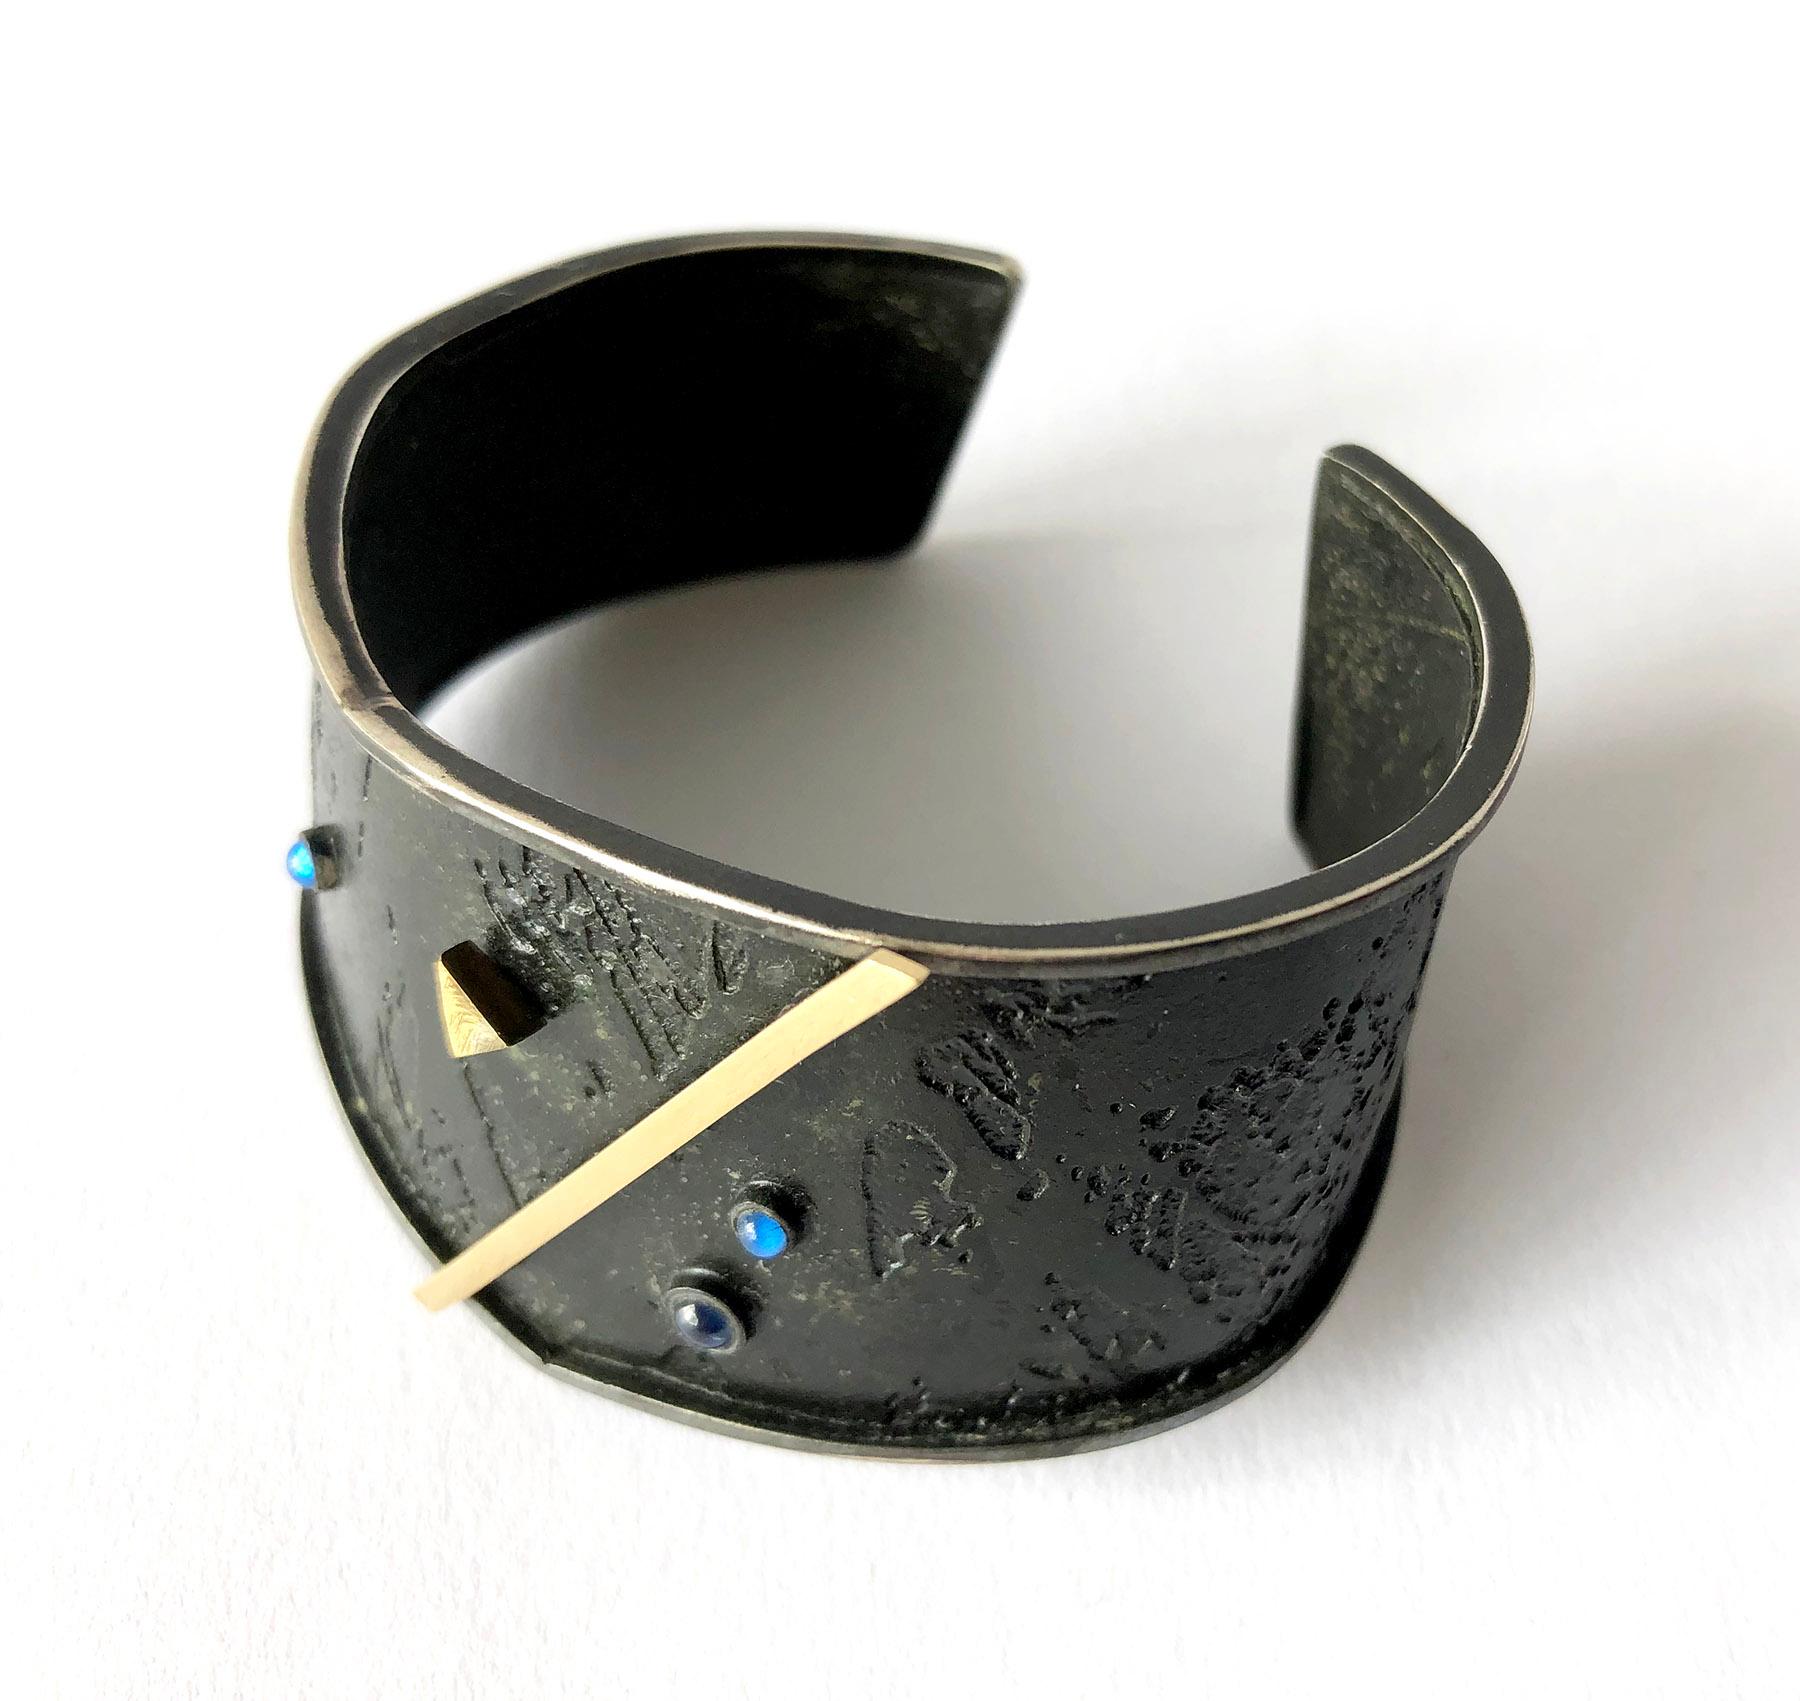 Post modernist cuff bracelet created by Enid Kaplan of New York City, circa 1984.  Bracelet is comprised of oxidized textured silver with floating blue sapphire cabochons and 18k gold geometric accents.  Inner length of the bracelet is 5.25